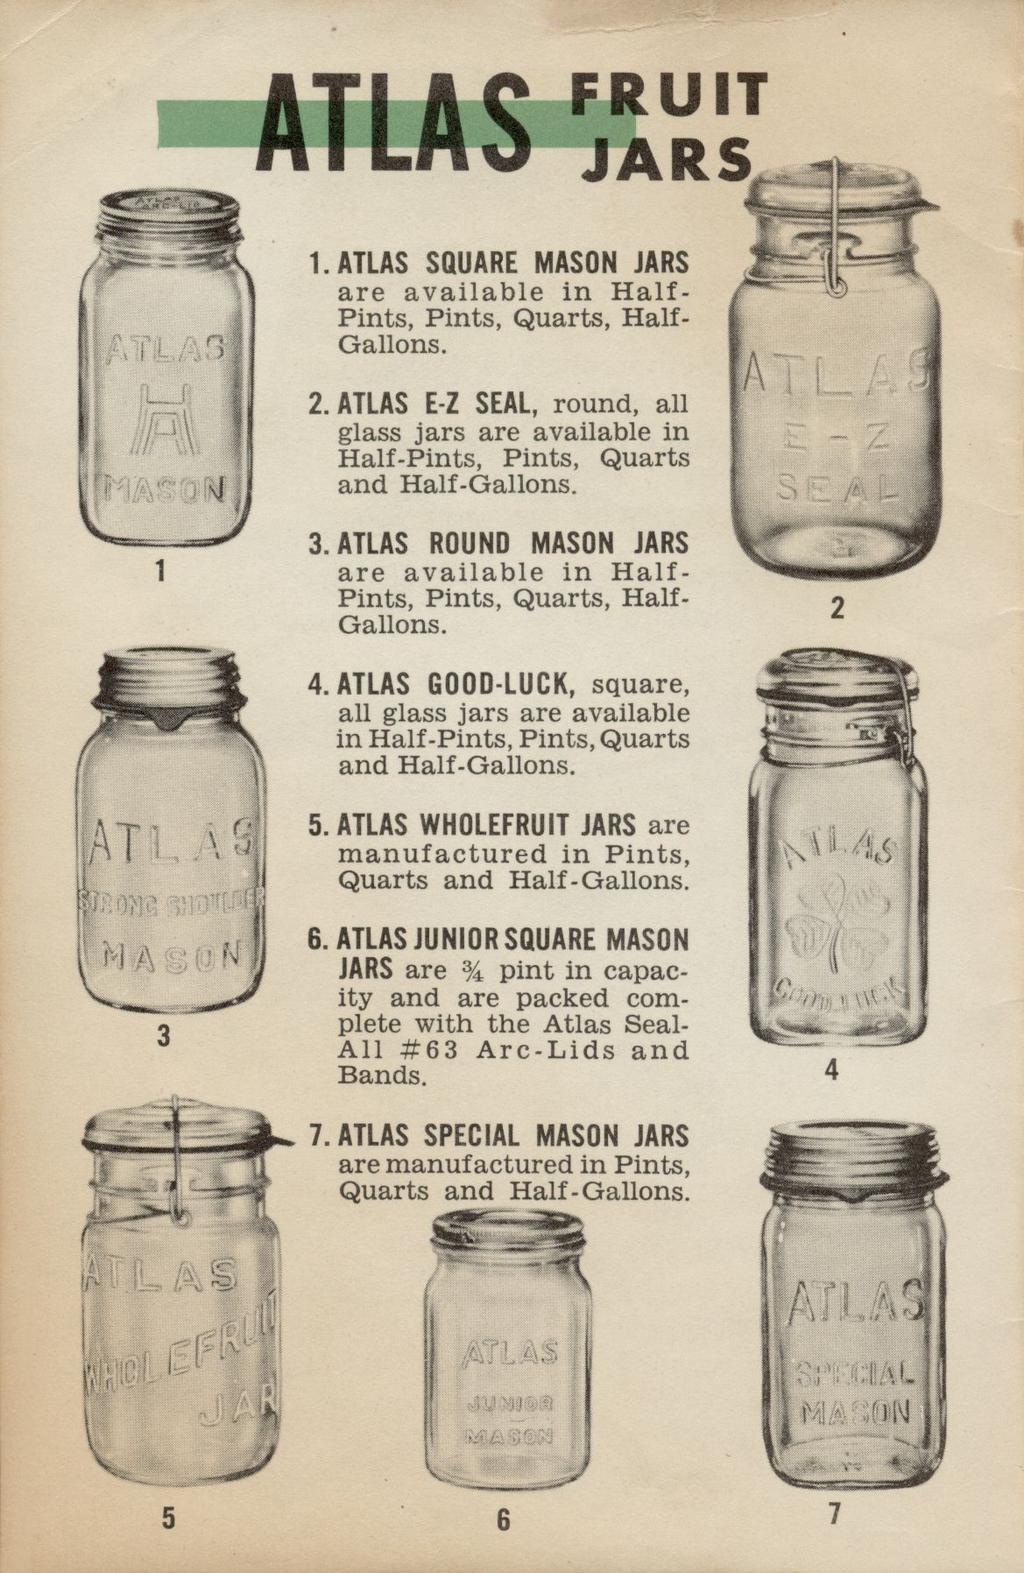 ATLAS ÏÏ? 1. ATLAS SQUARE MASON JARS are available in Half- Pints, Pints, Quarts, Half- Gallons. 2. ATLAS E-Z SEAL, round, all glass jars are available in Half-Pints, Pints, Quarts and Half-Gallons.